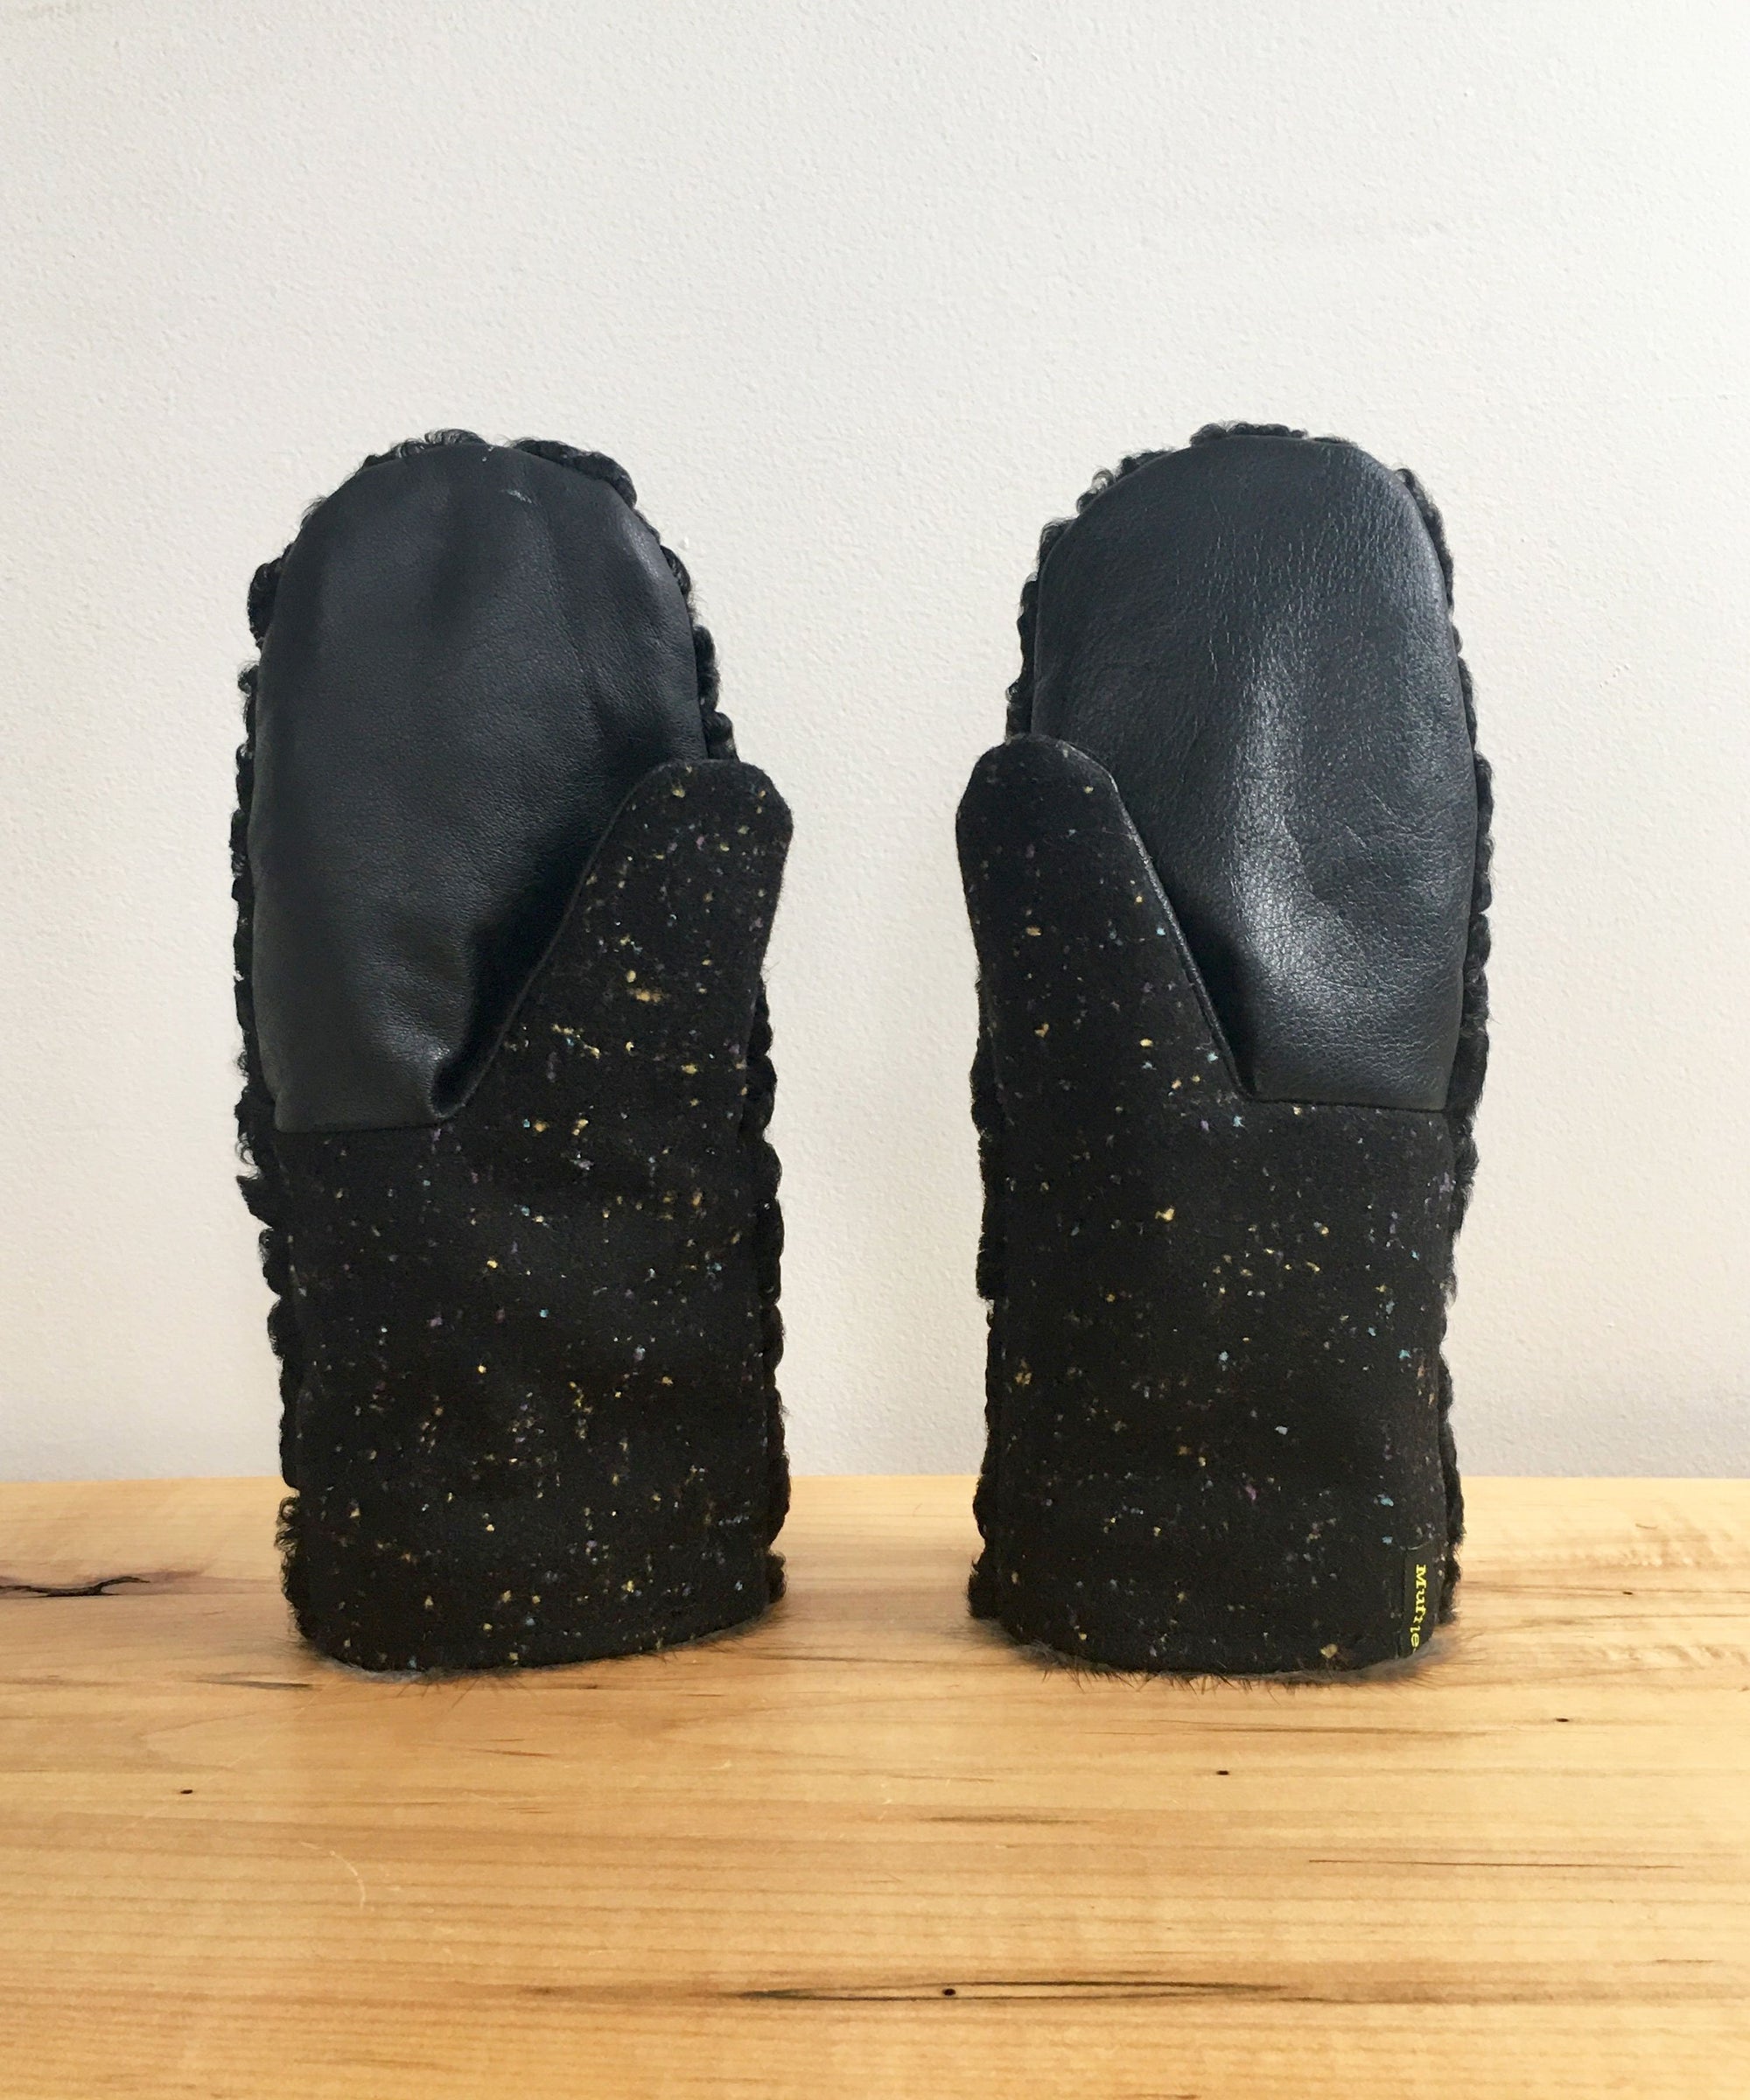 Sustainable Real Fur Winter Mittens with Fur Lining made in Canada, Black Astrakan Mittens